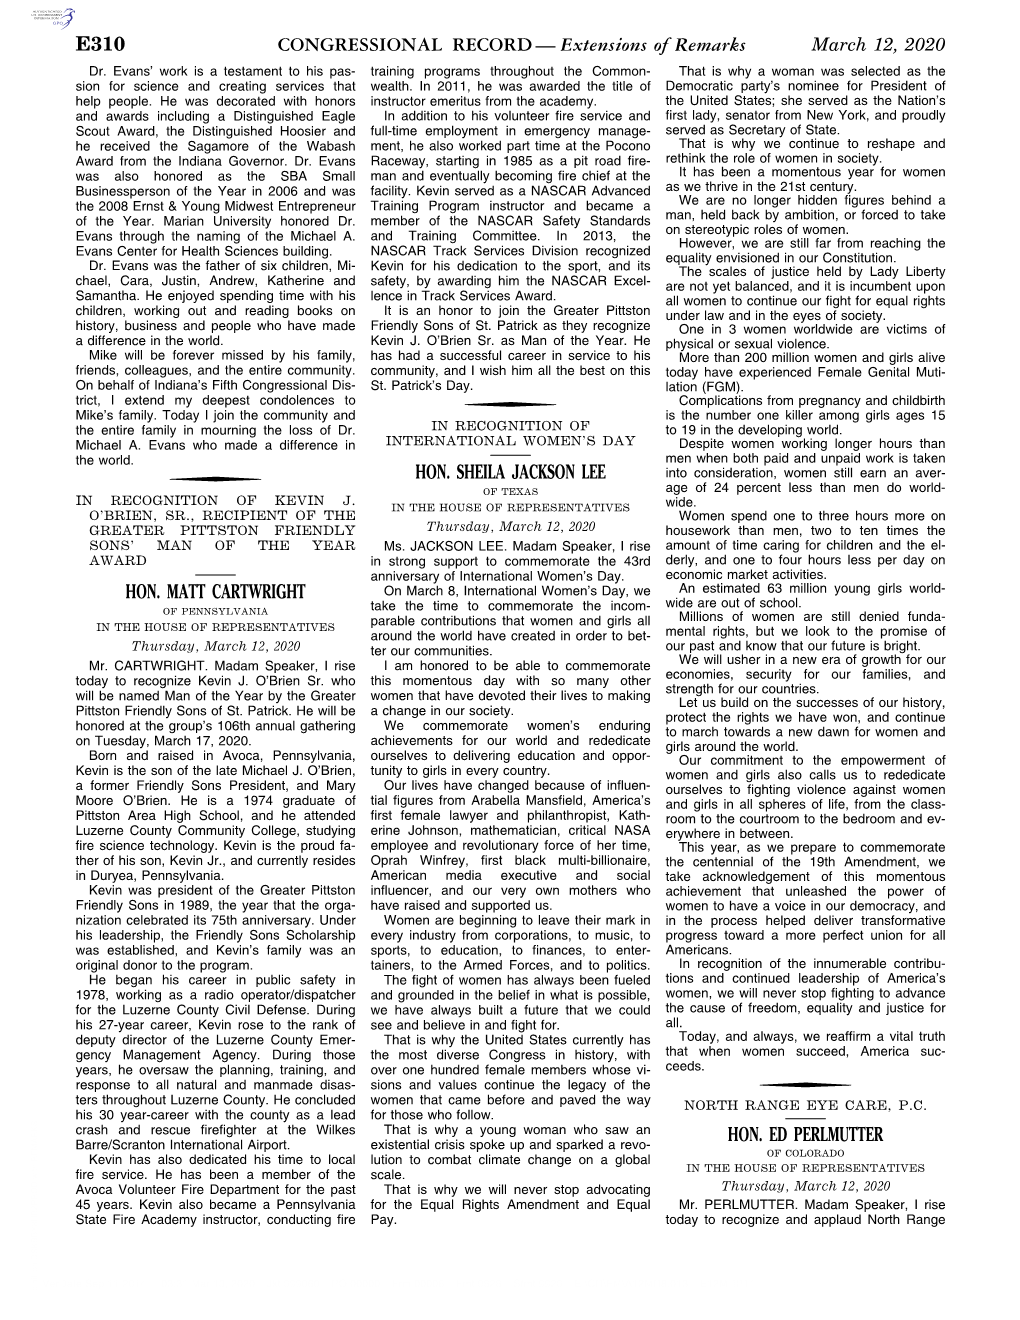 CONGRESSIONAL RECORD— Extensions of Remarks E310 HON